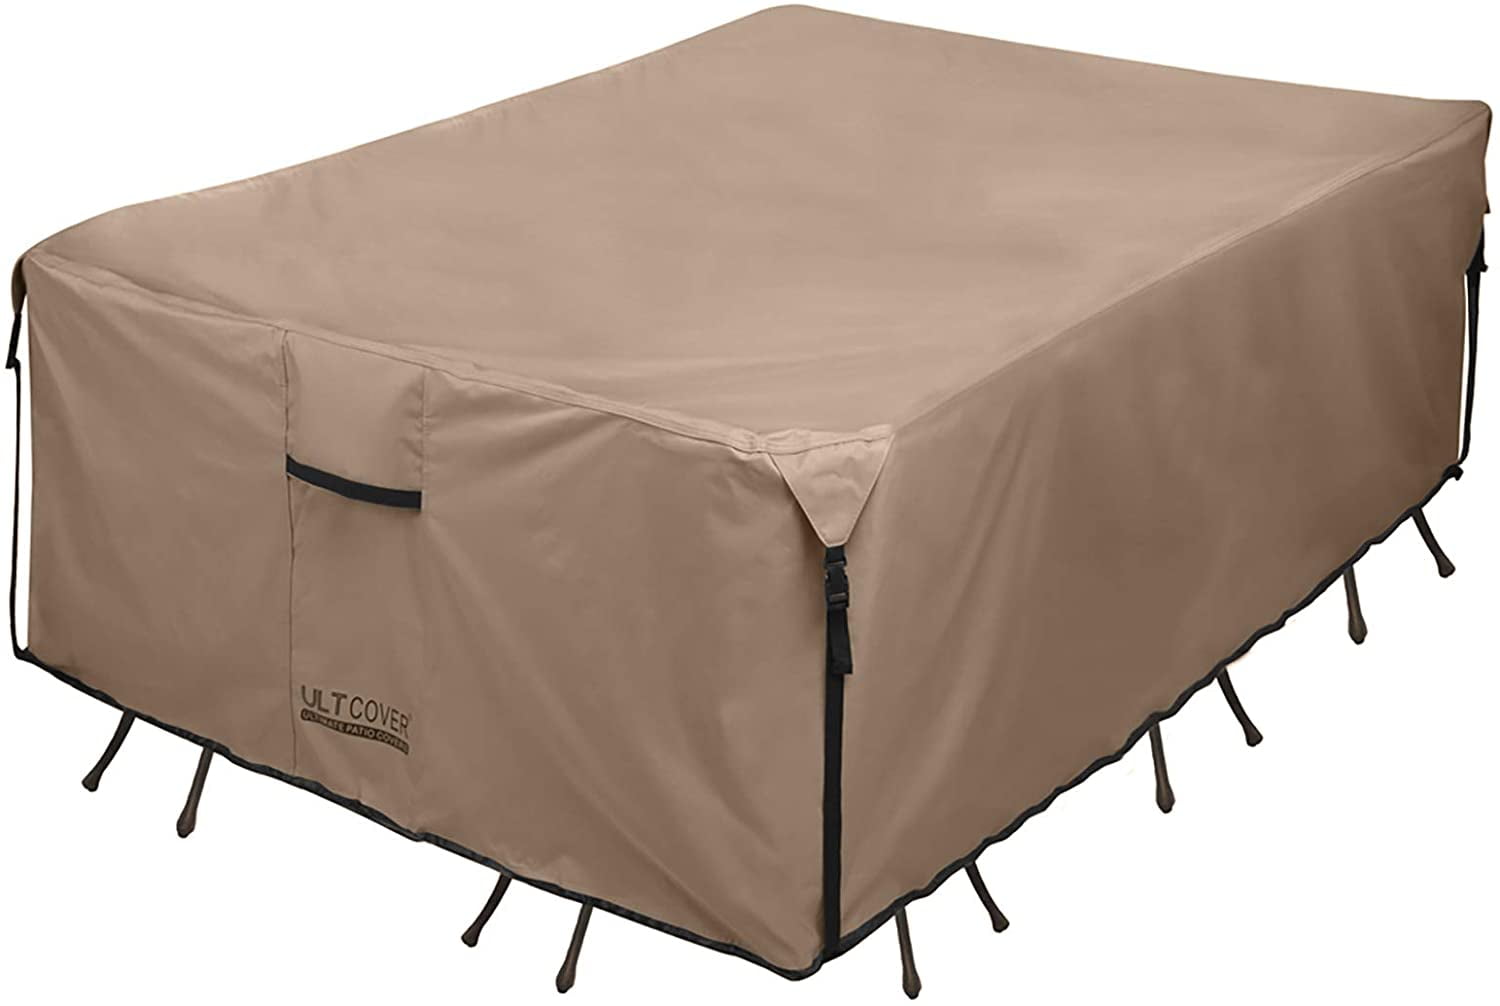 grand live Beige Patio Table Cover 300g/m? Rectangular-Large Size Durable and Water Resistant Furniture Set Cover 98X47x33inch